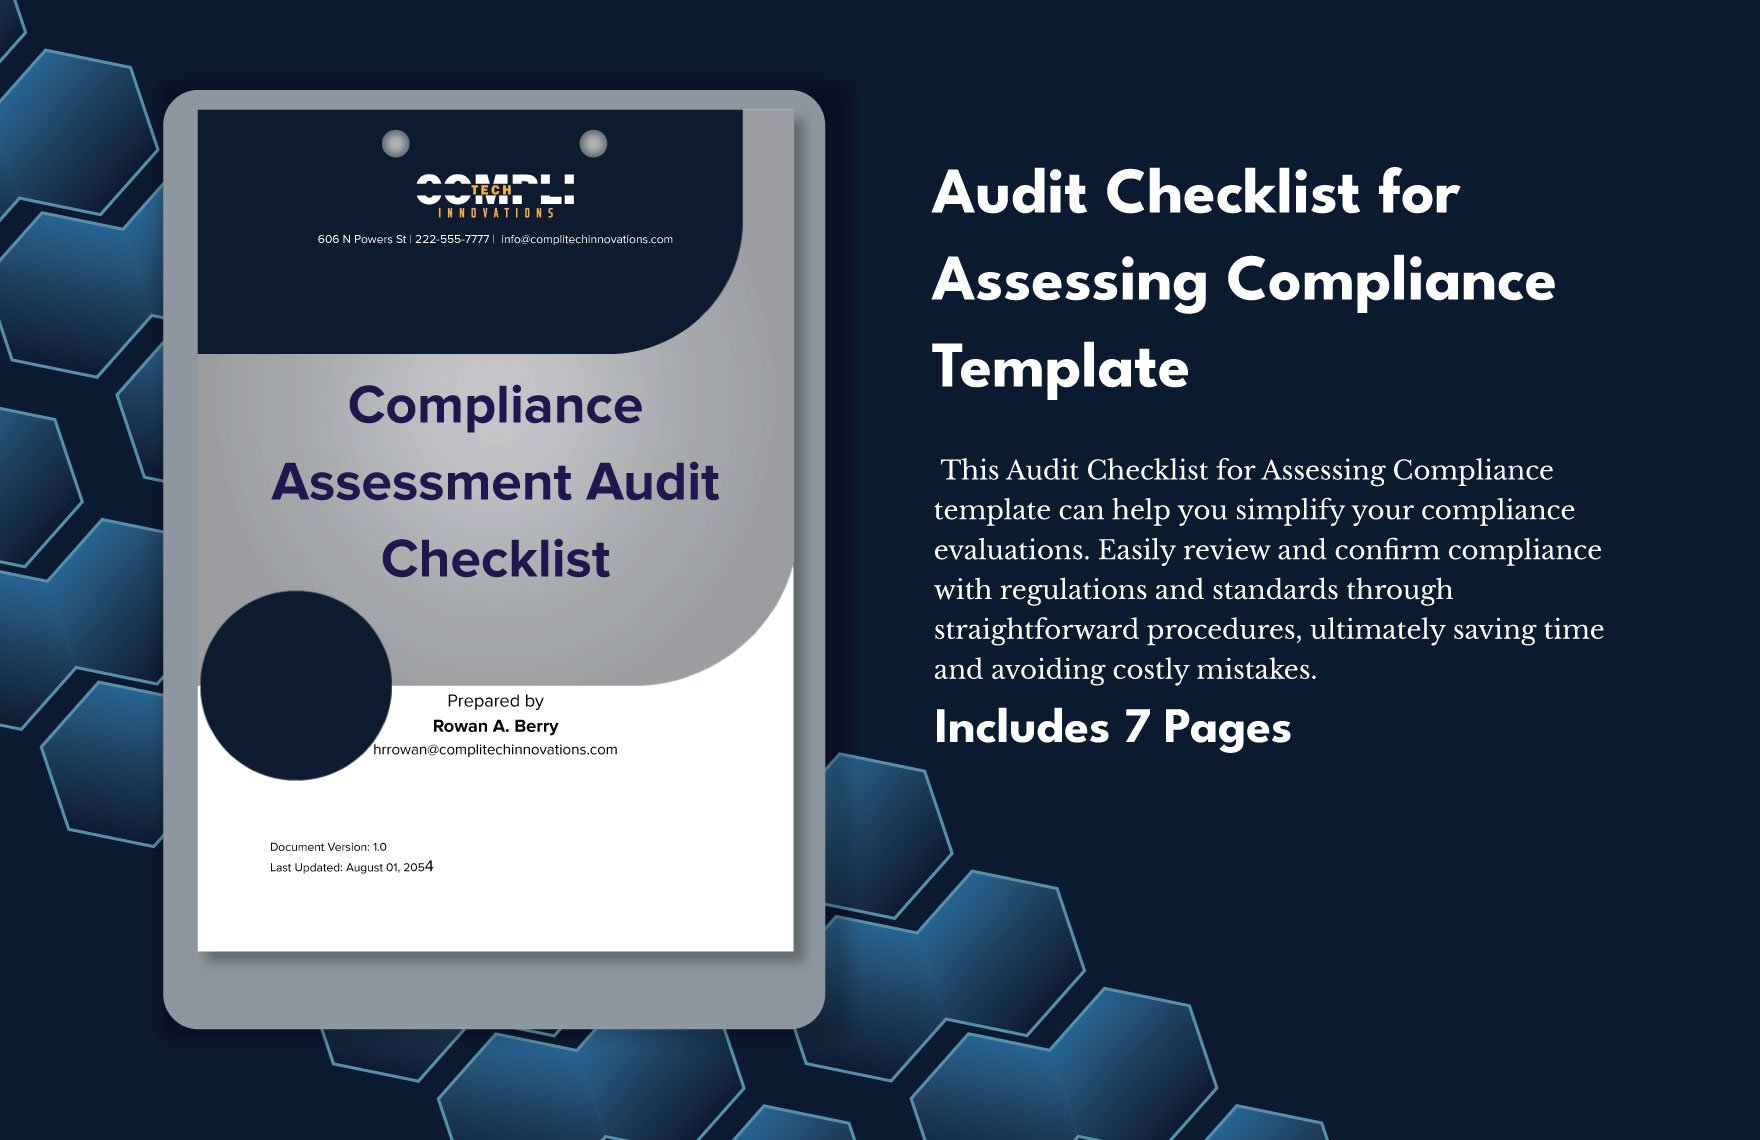 Audit Checklist for Assessing Compliance Template